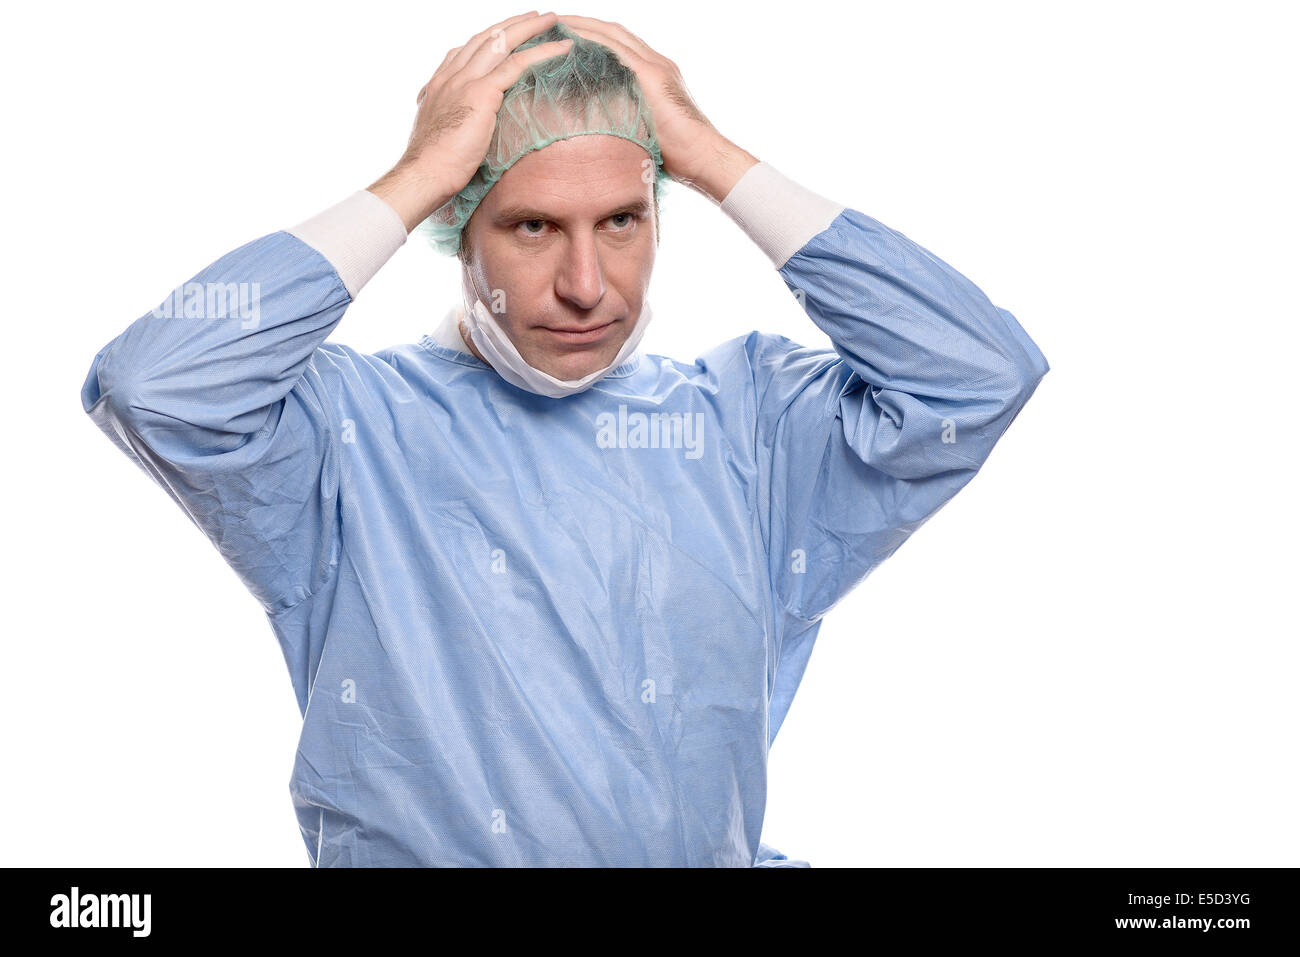 Depressed surgeon in theater garb or scrubs holding his hands to his head with a grim expression isolated on white Stock Photo